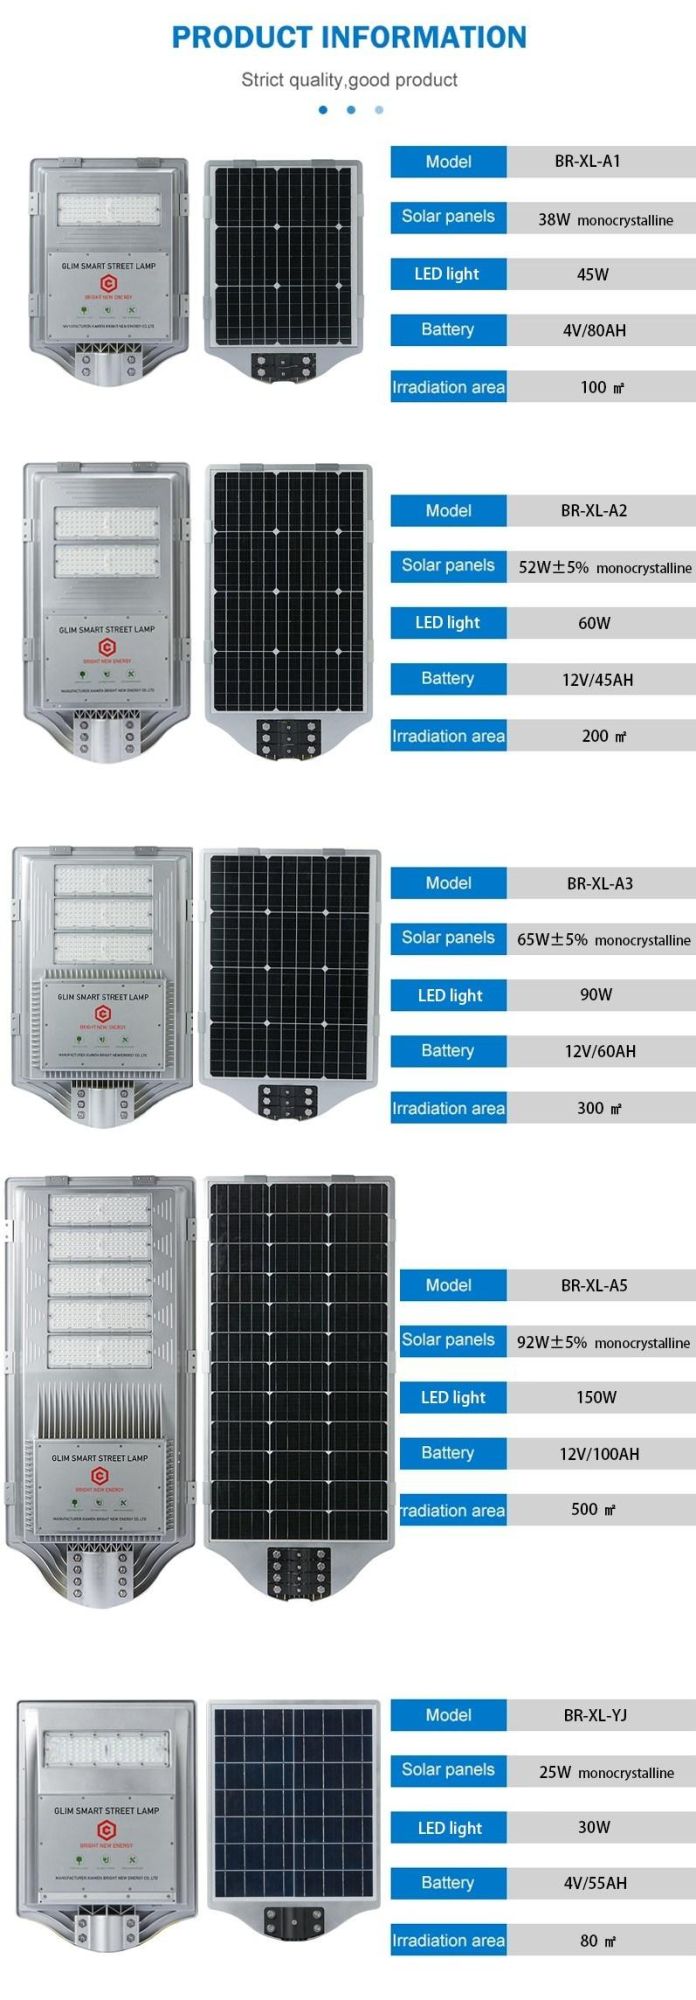 New 30W-150W 150lm/W All in One Solar Street Light LED Lamp Lights Lighting Decoration Energy Saving Power System Home Lamps Bulb Products Sensor Light